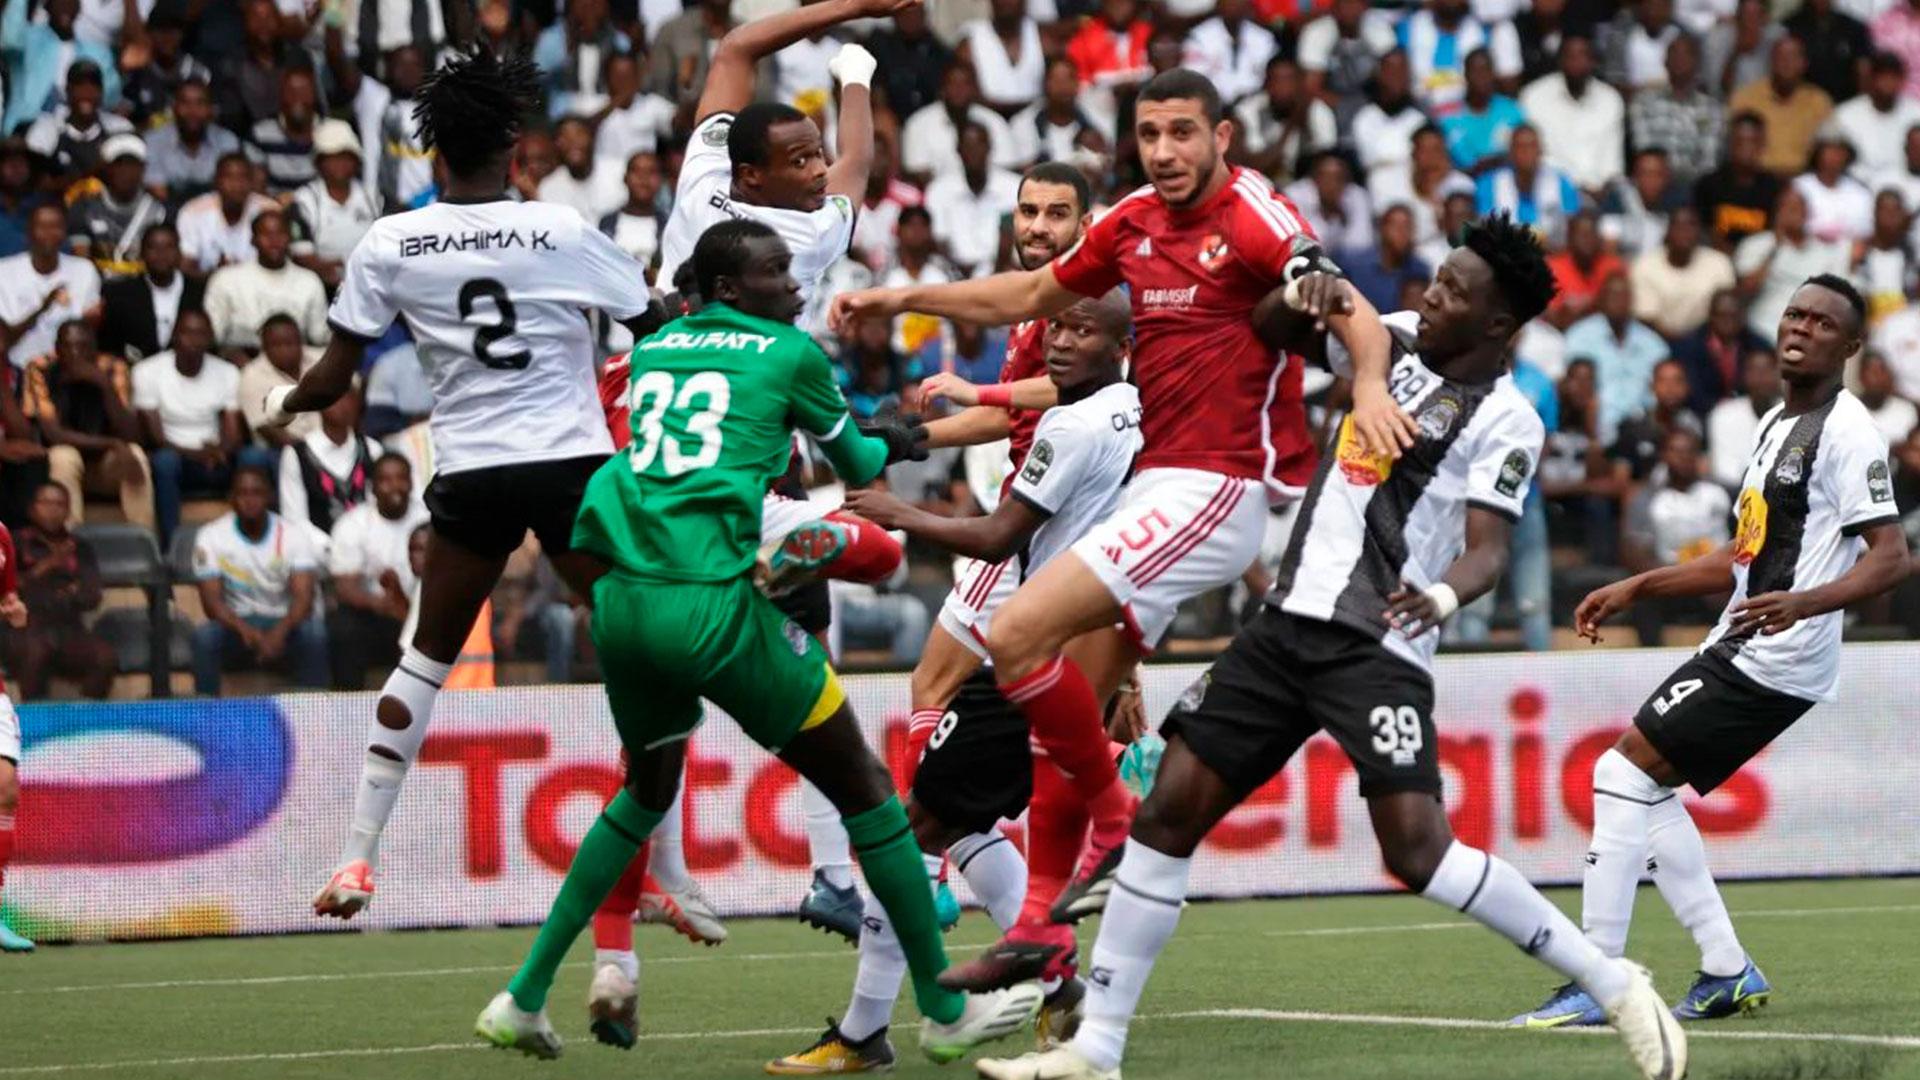 VIDEO | CAF CHAMPIONS LEAGUE Highlights:TP Mazembe vs Al Ahly